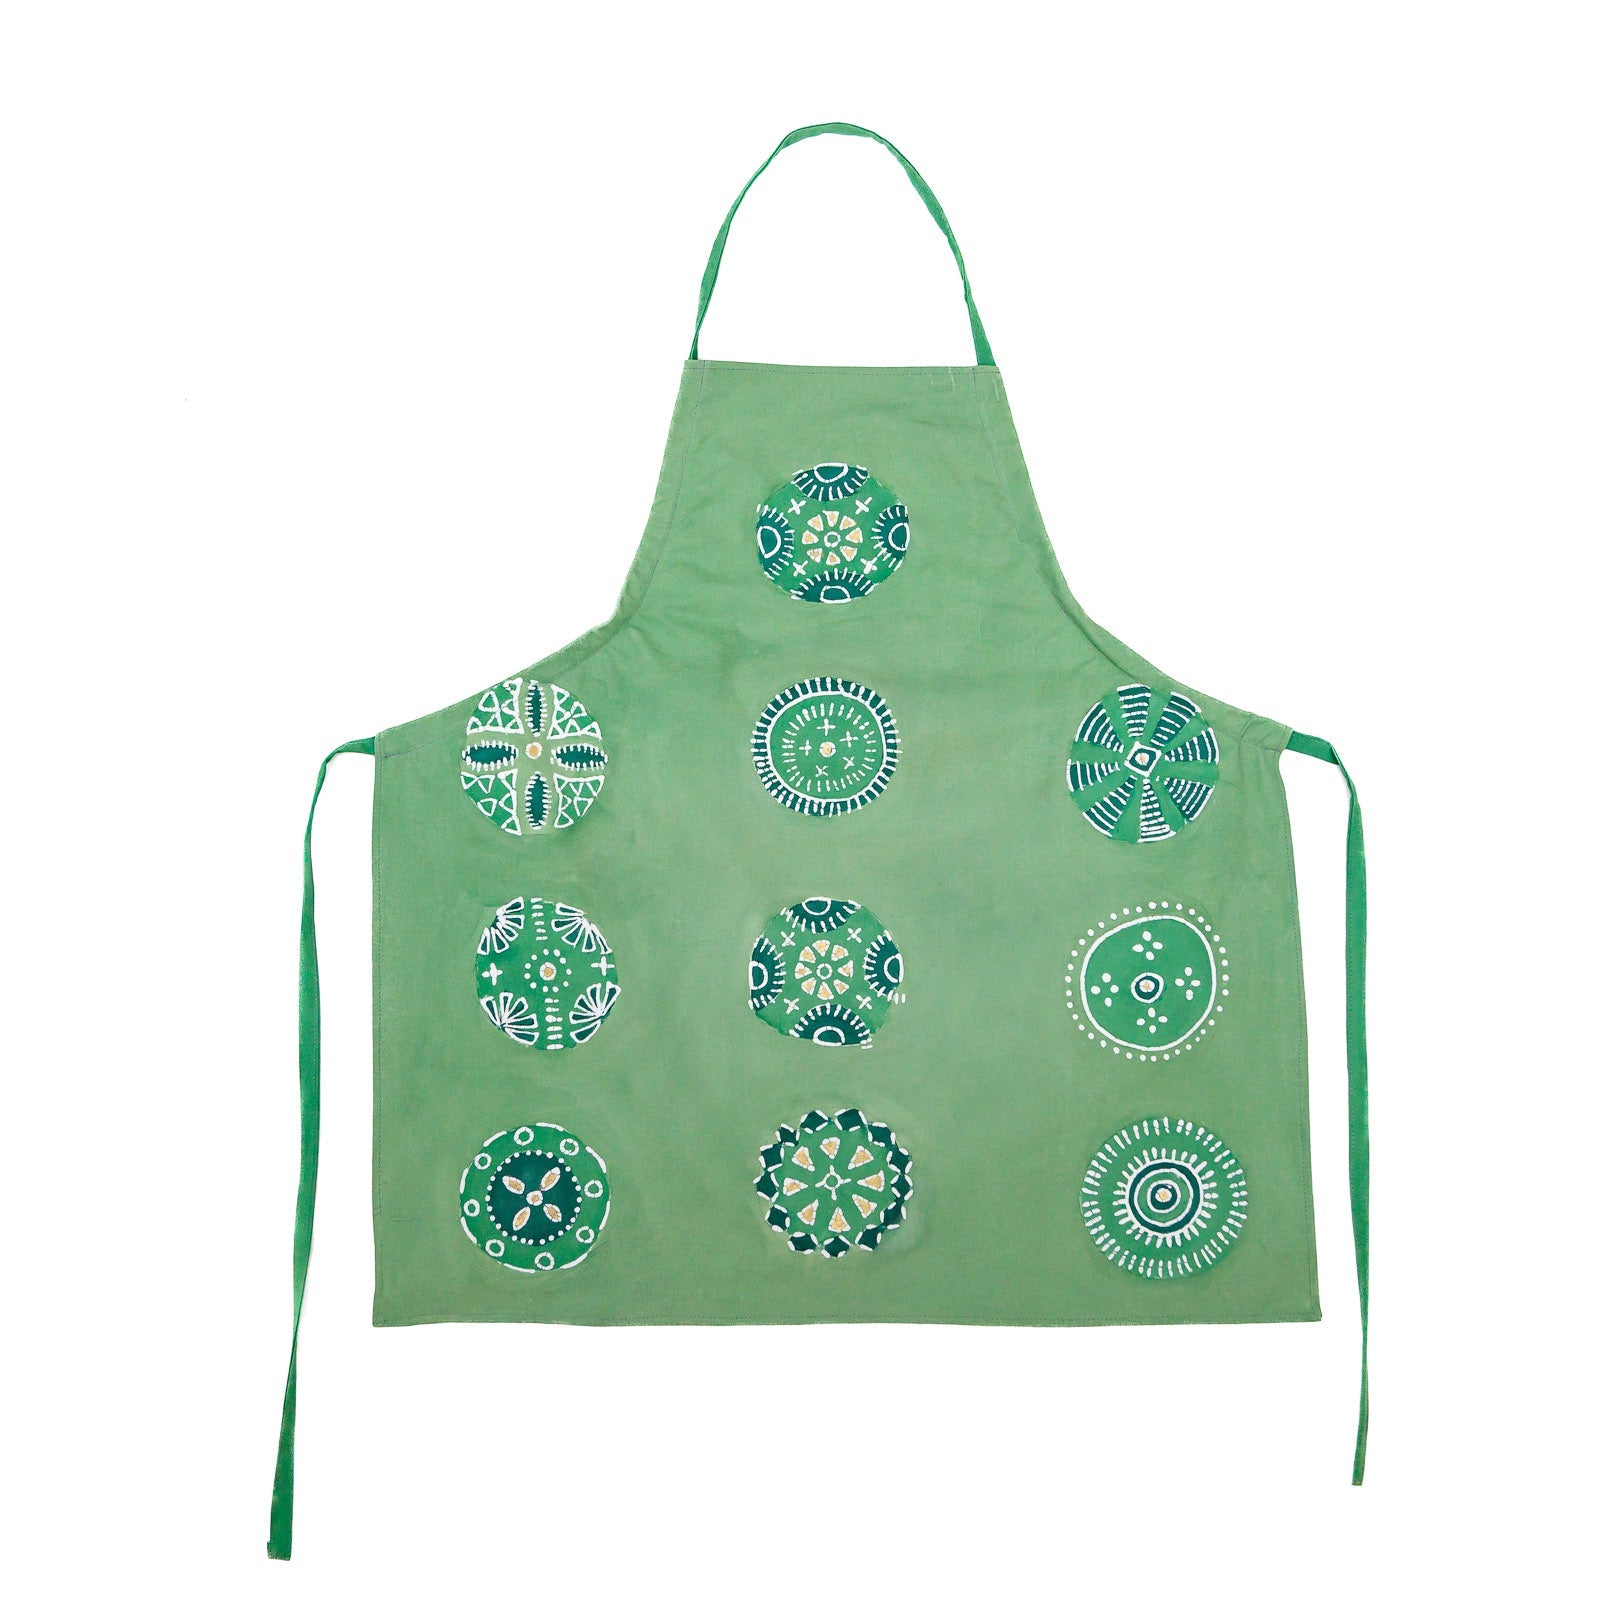 Kuosi Jade Apron - Hand Painted by TRIBAL TEXTILES - Handcrafted Home Decor Interiors - African Made